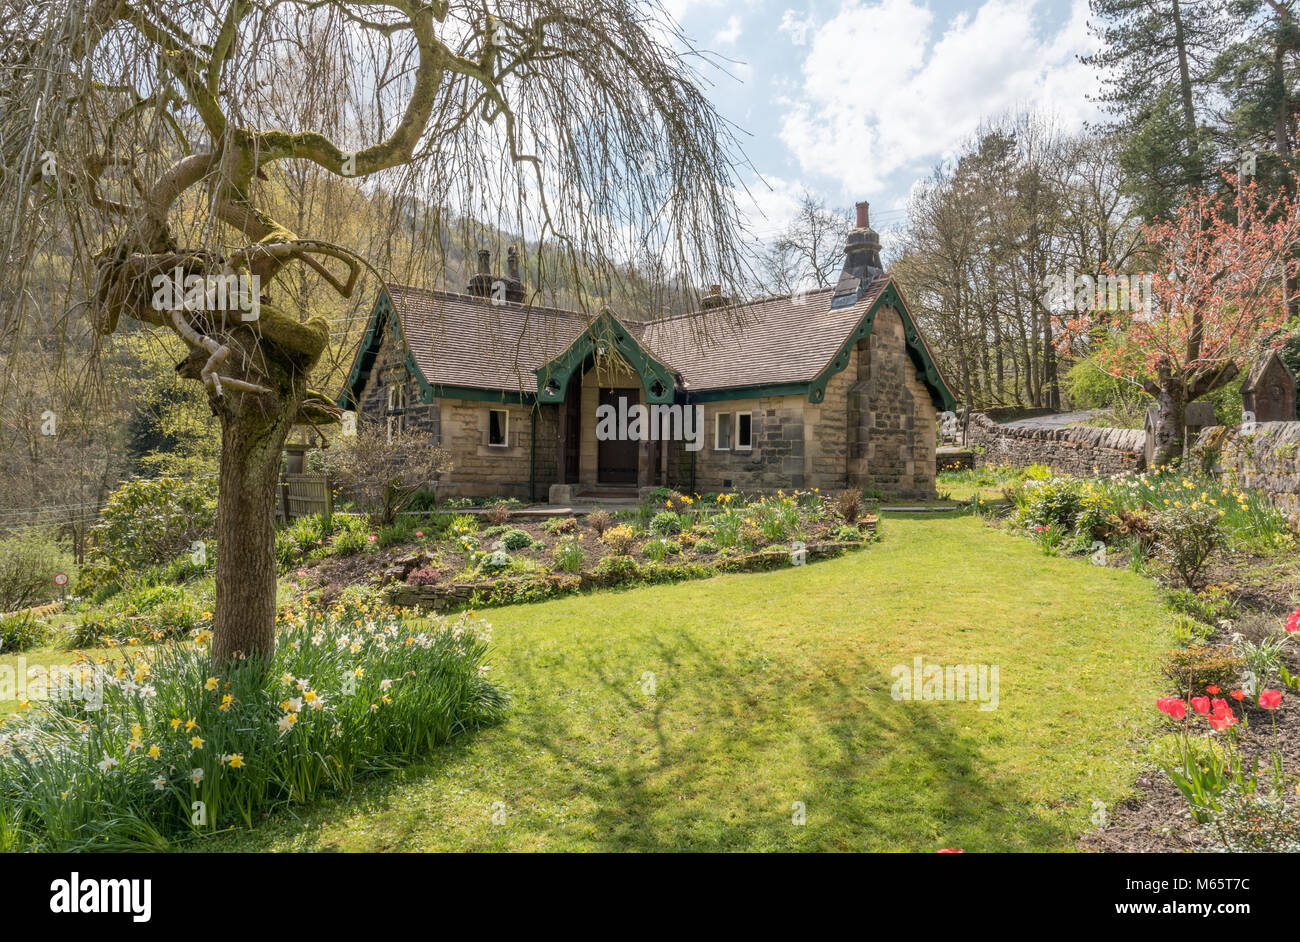 The Lodge at Hardcastle Crags, Halifax, West Yorkshire, England Stockfoto